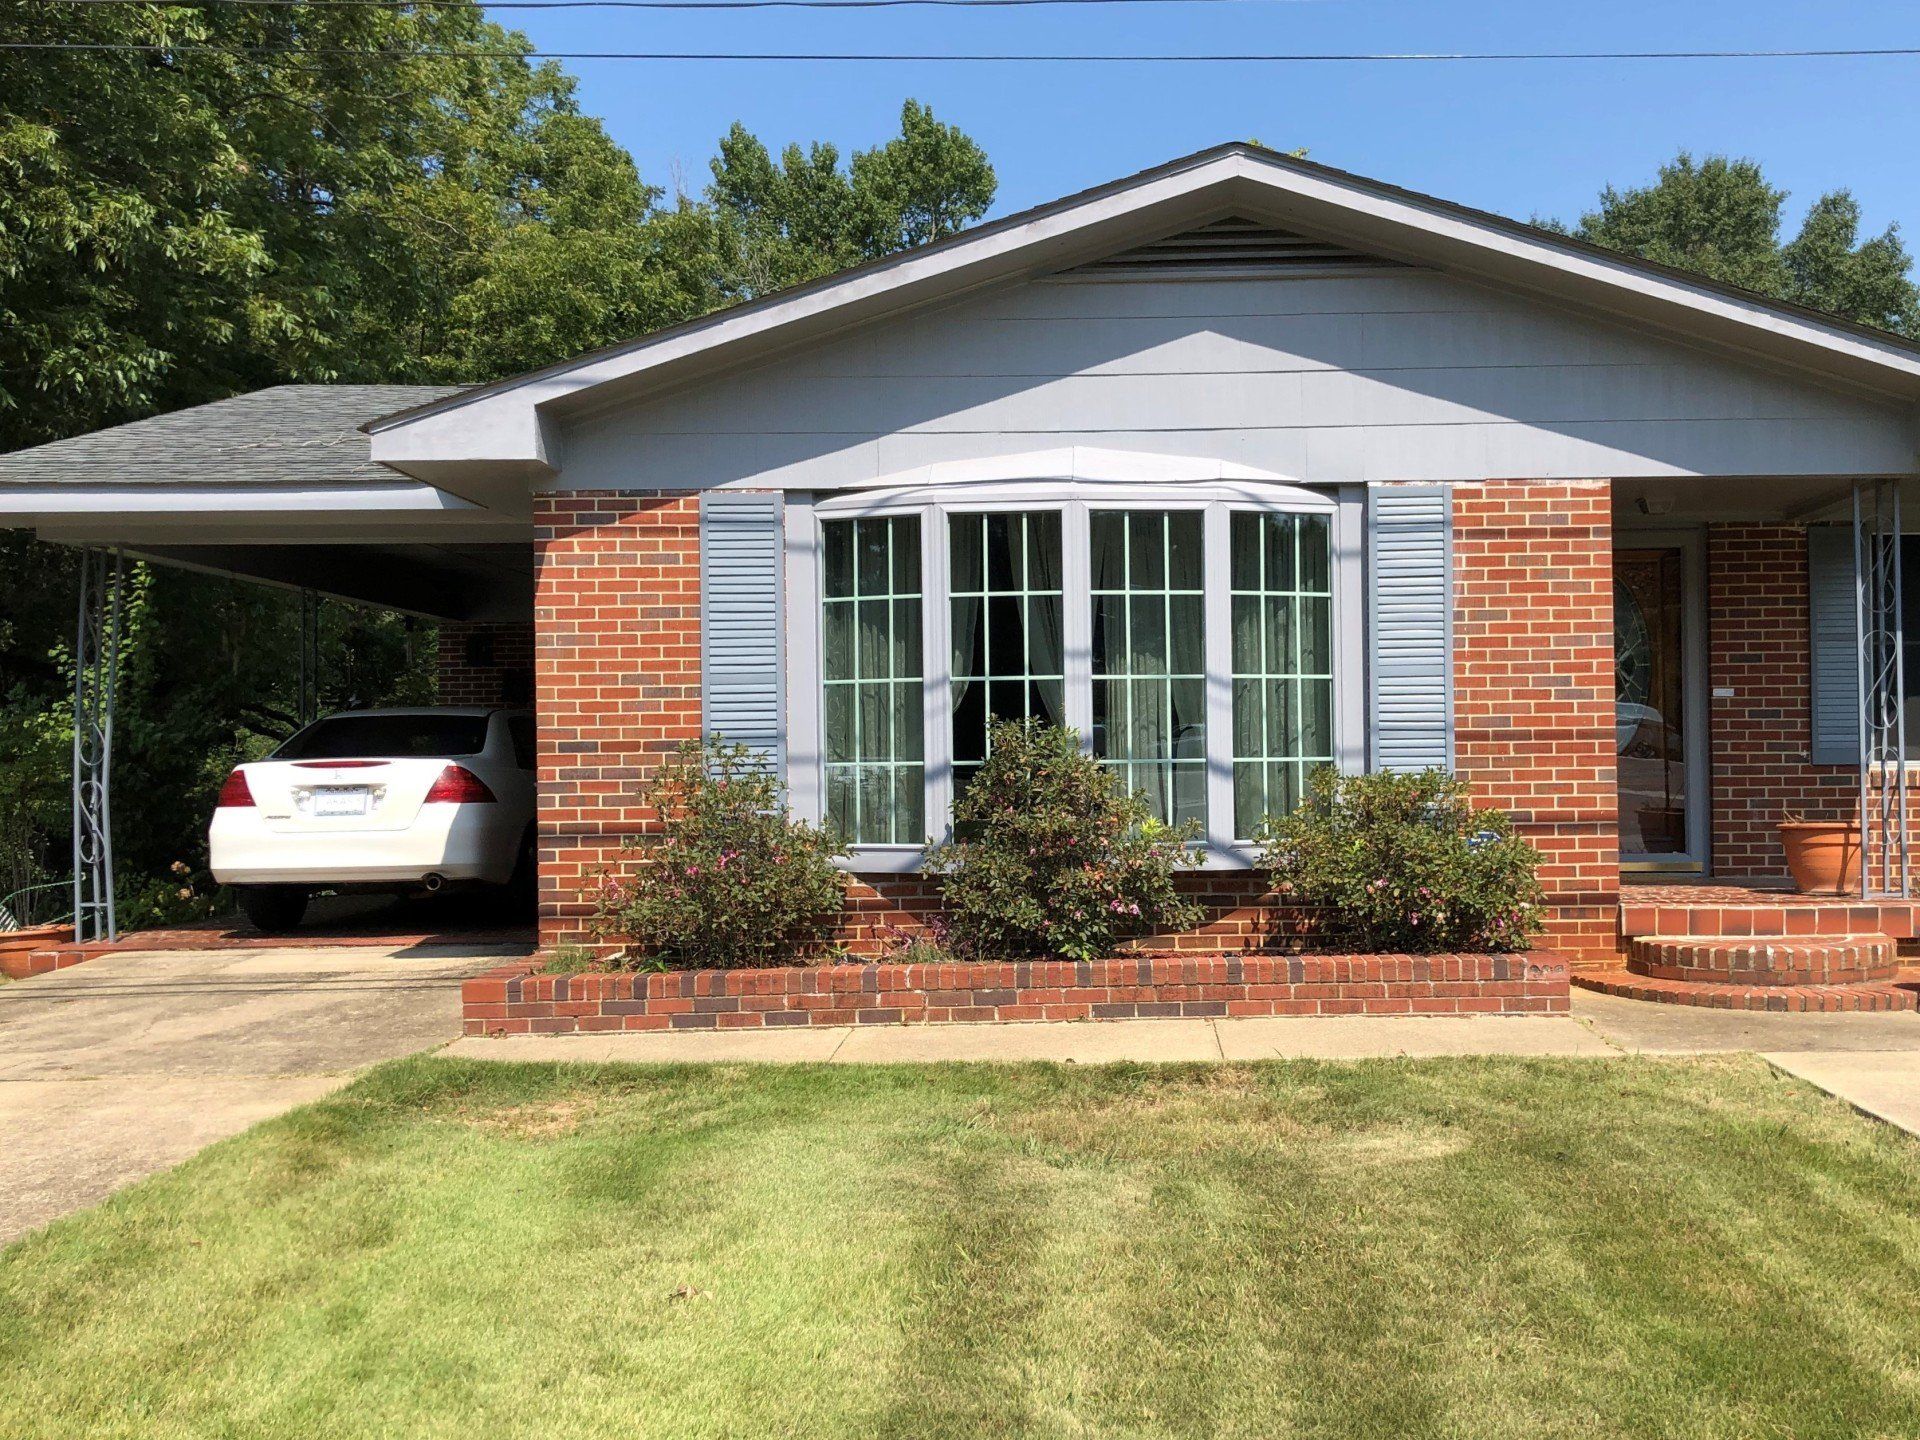 Residential Window Tinting service blocked half the heat gain along with 99% UV on 9-11-2019 - SPF Crystal Clear home tinting in Auburn, AL